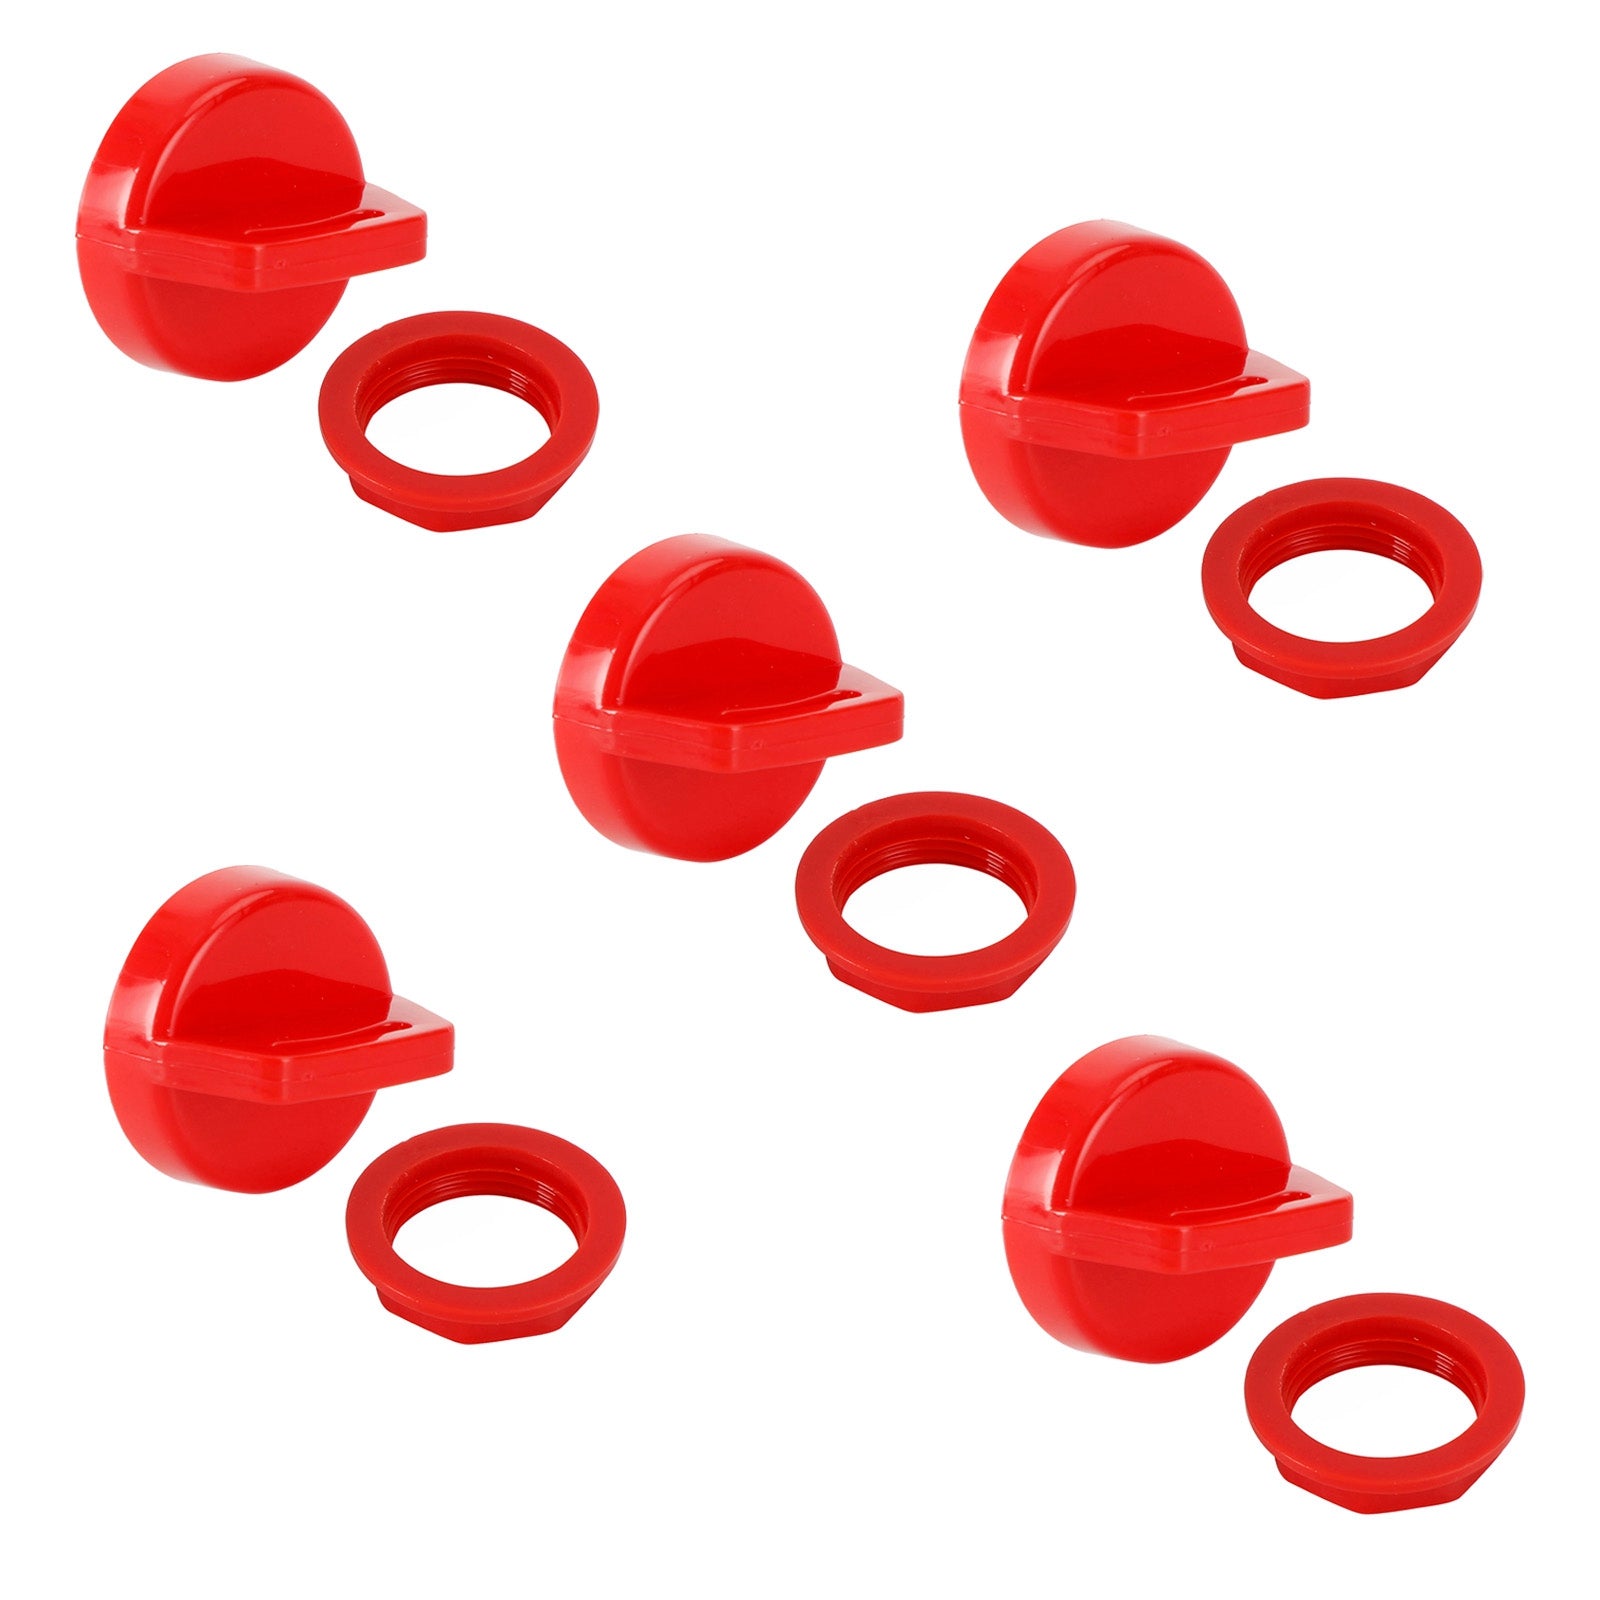 5pcs Key Switch Cover Red For Polaris Ranger 400 500 570 800 900 1000 5433534 Generic